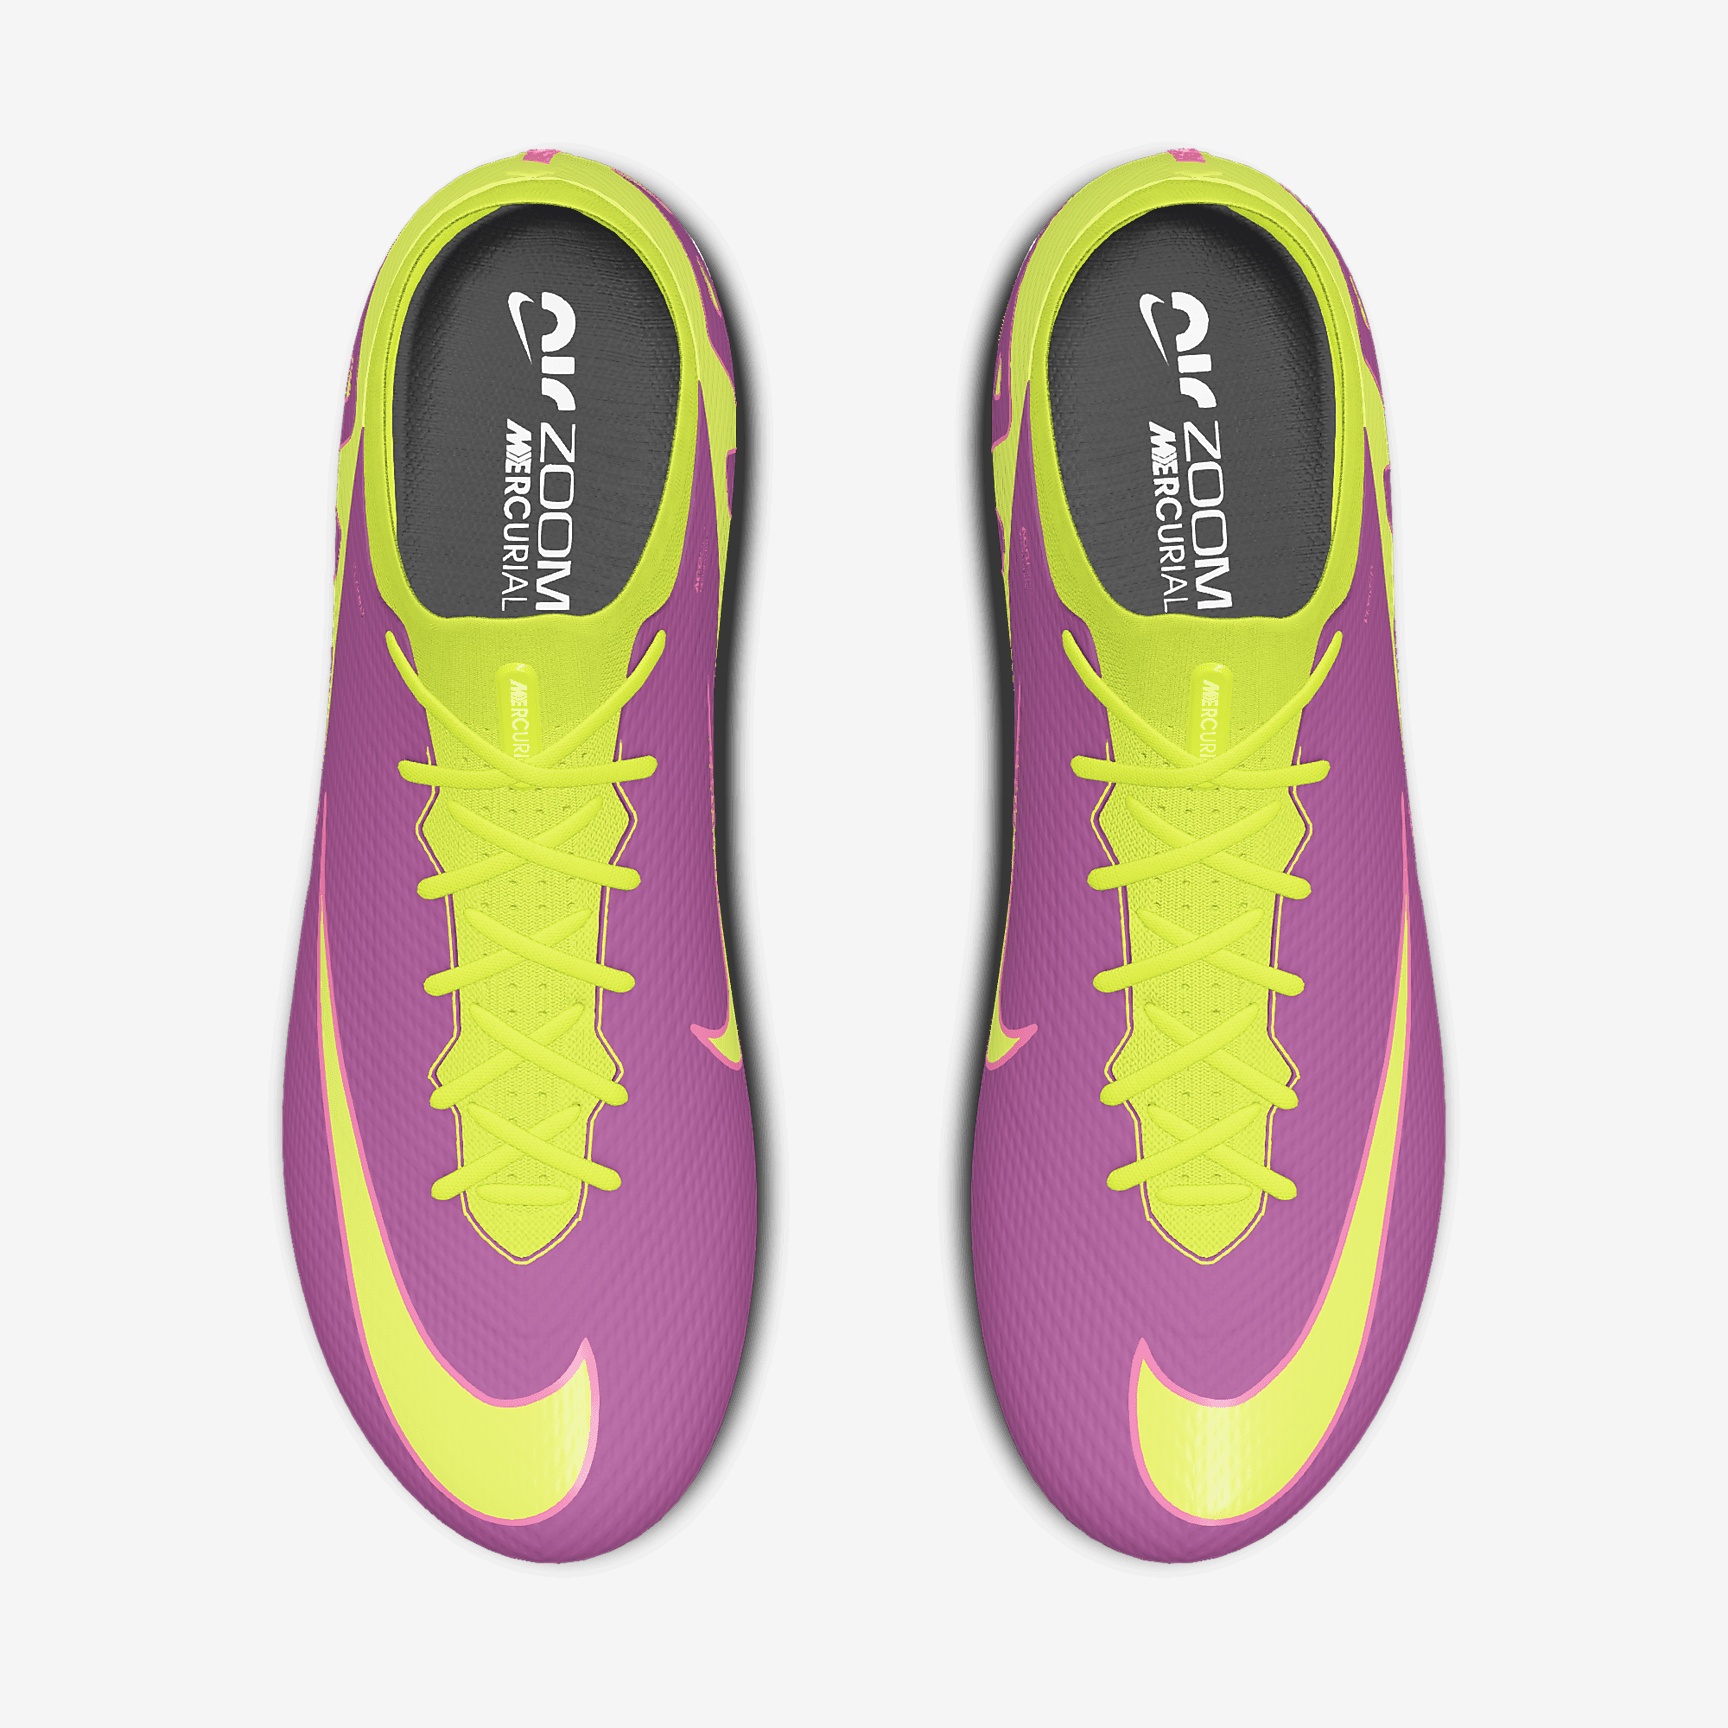 Nike Mercurial Vapor 15 Elite By You Custom Firm-Ground Soccer Cleats - 4